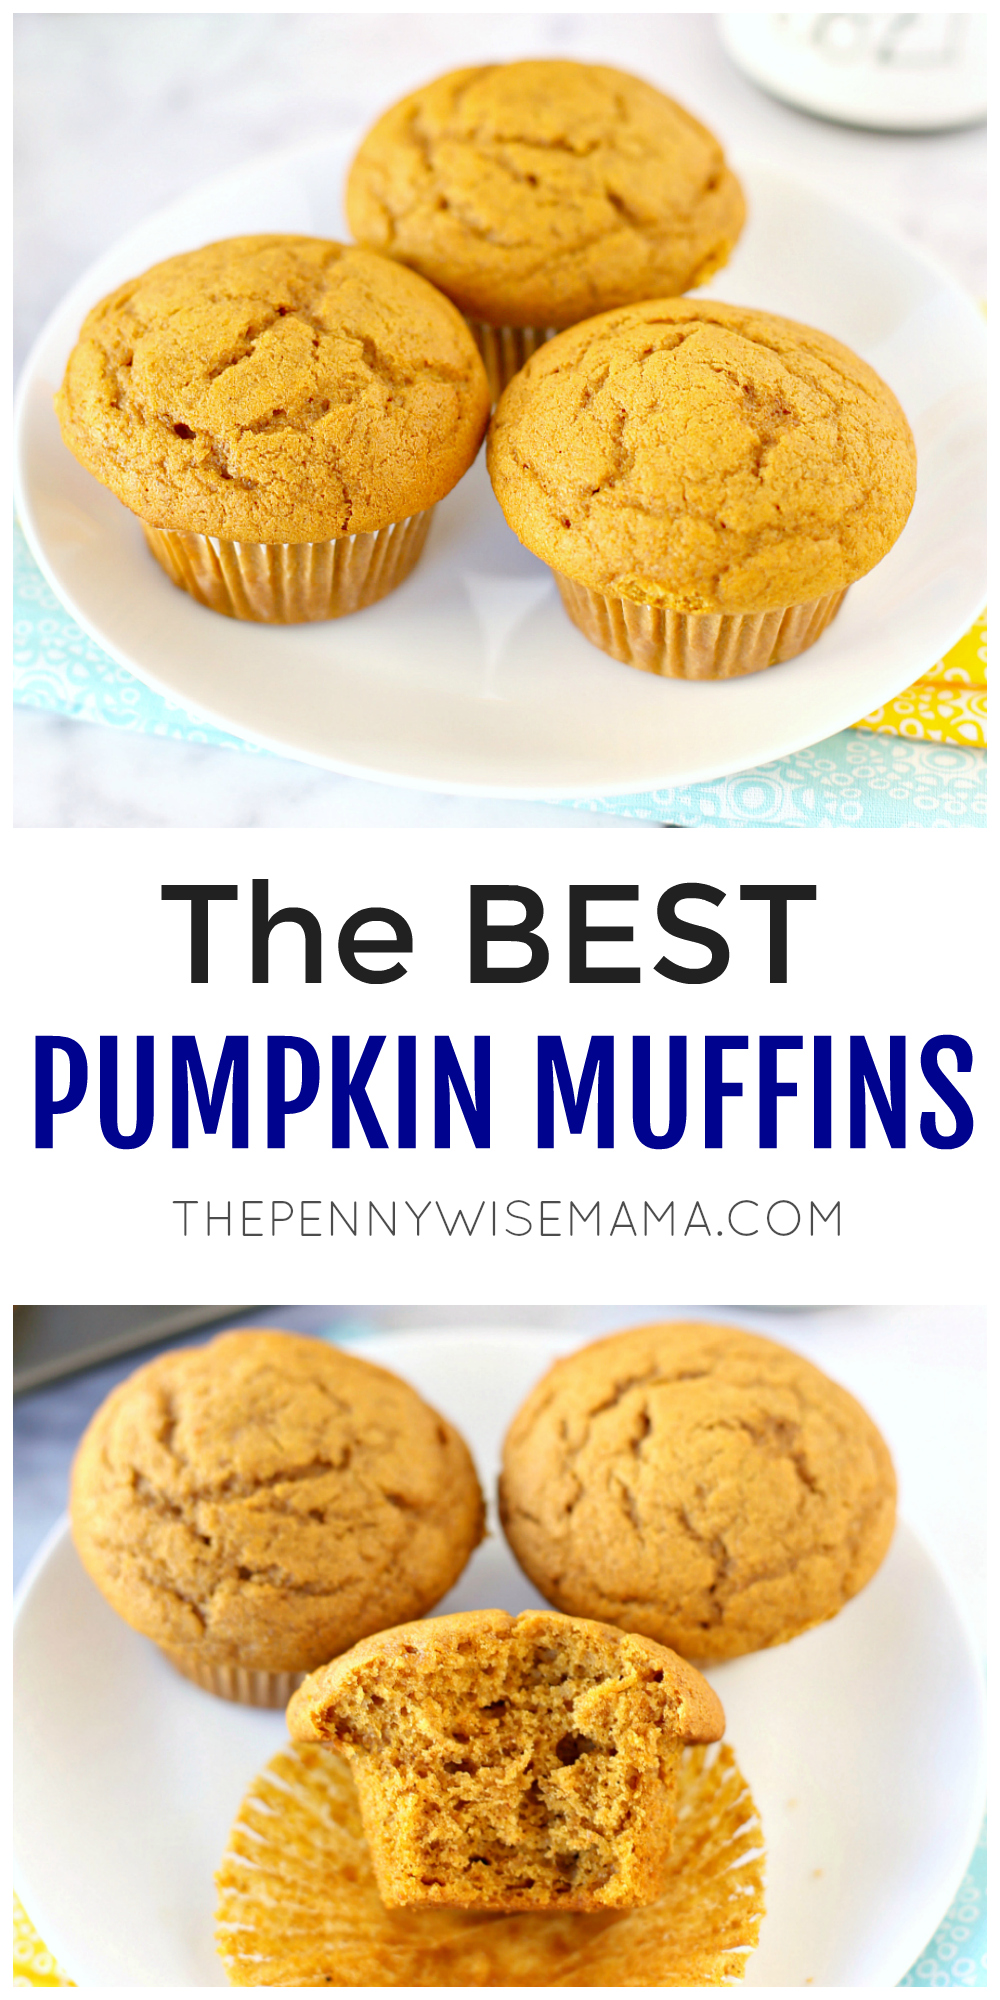 Easy Pumpkin Muffins Recipe! These healthy pumpkin muffins are incredibly moist and full of flavor -- simply the best!